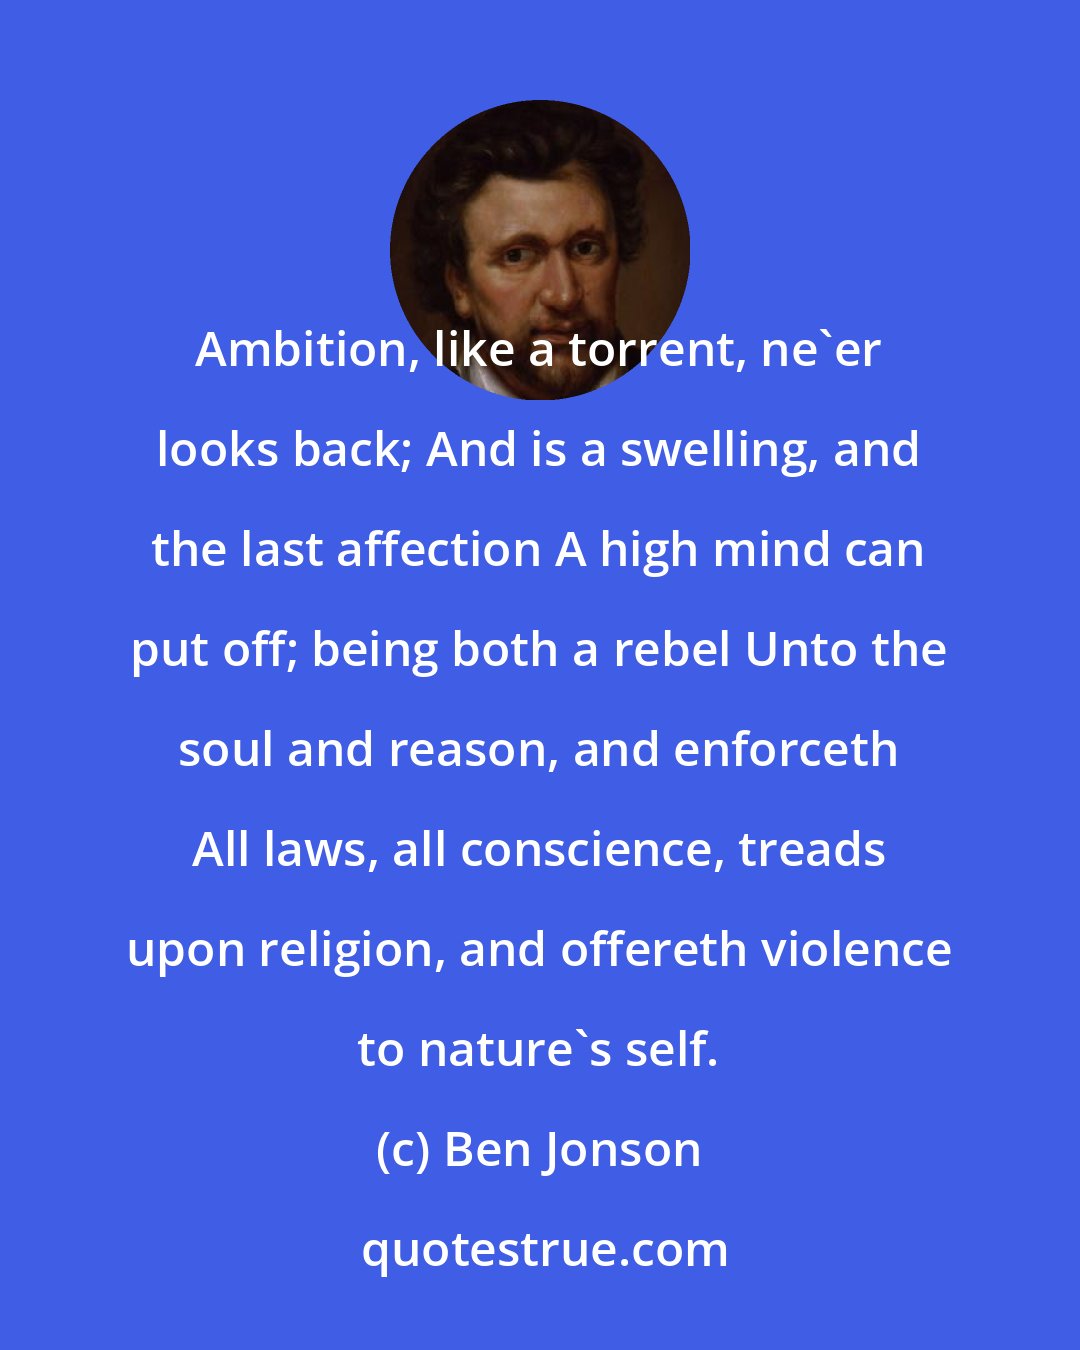 Ben Jonson: Ambition, like a torrent, ne'er looks back; And is a swelling, and the last affection A high mind can put off; being both a rebel Unto the soul and reason, and enforceth All laws, all conscience, treads upon religion, and offereth violence to nature's self.